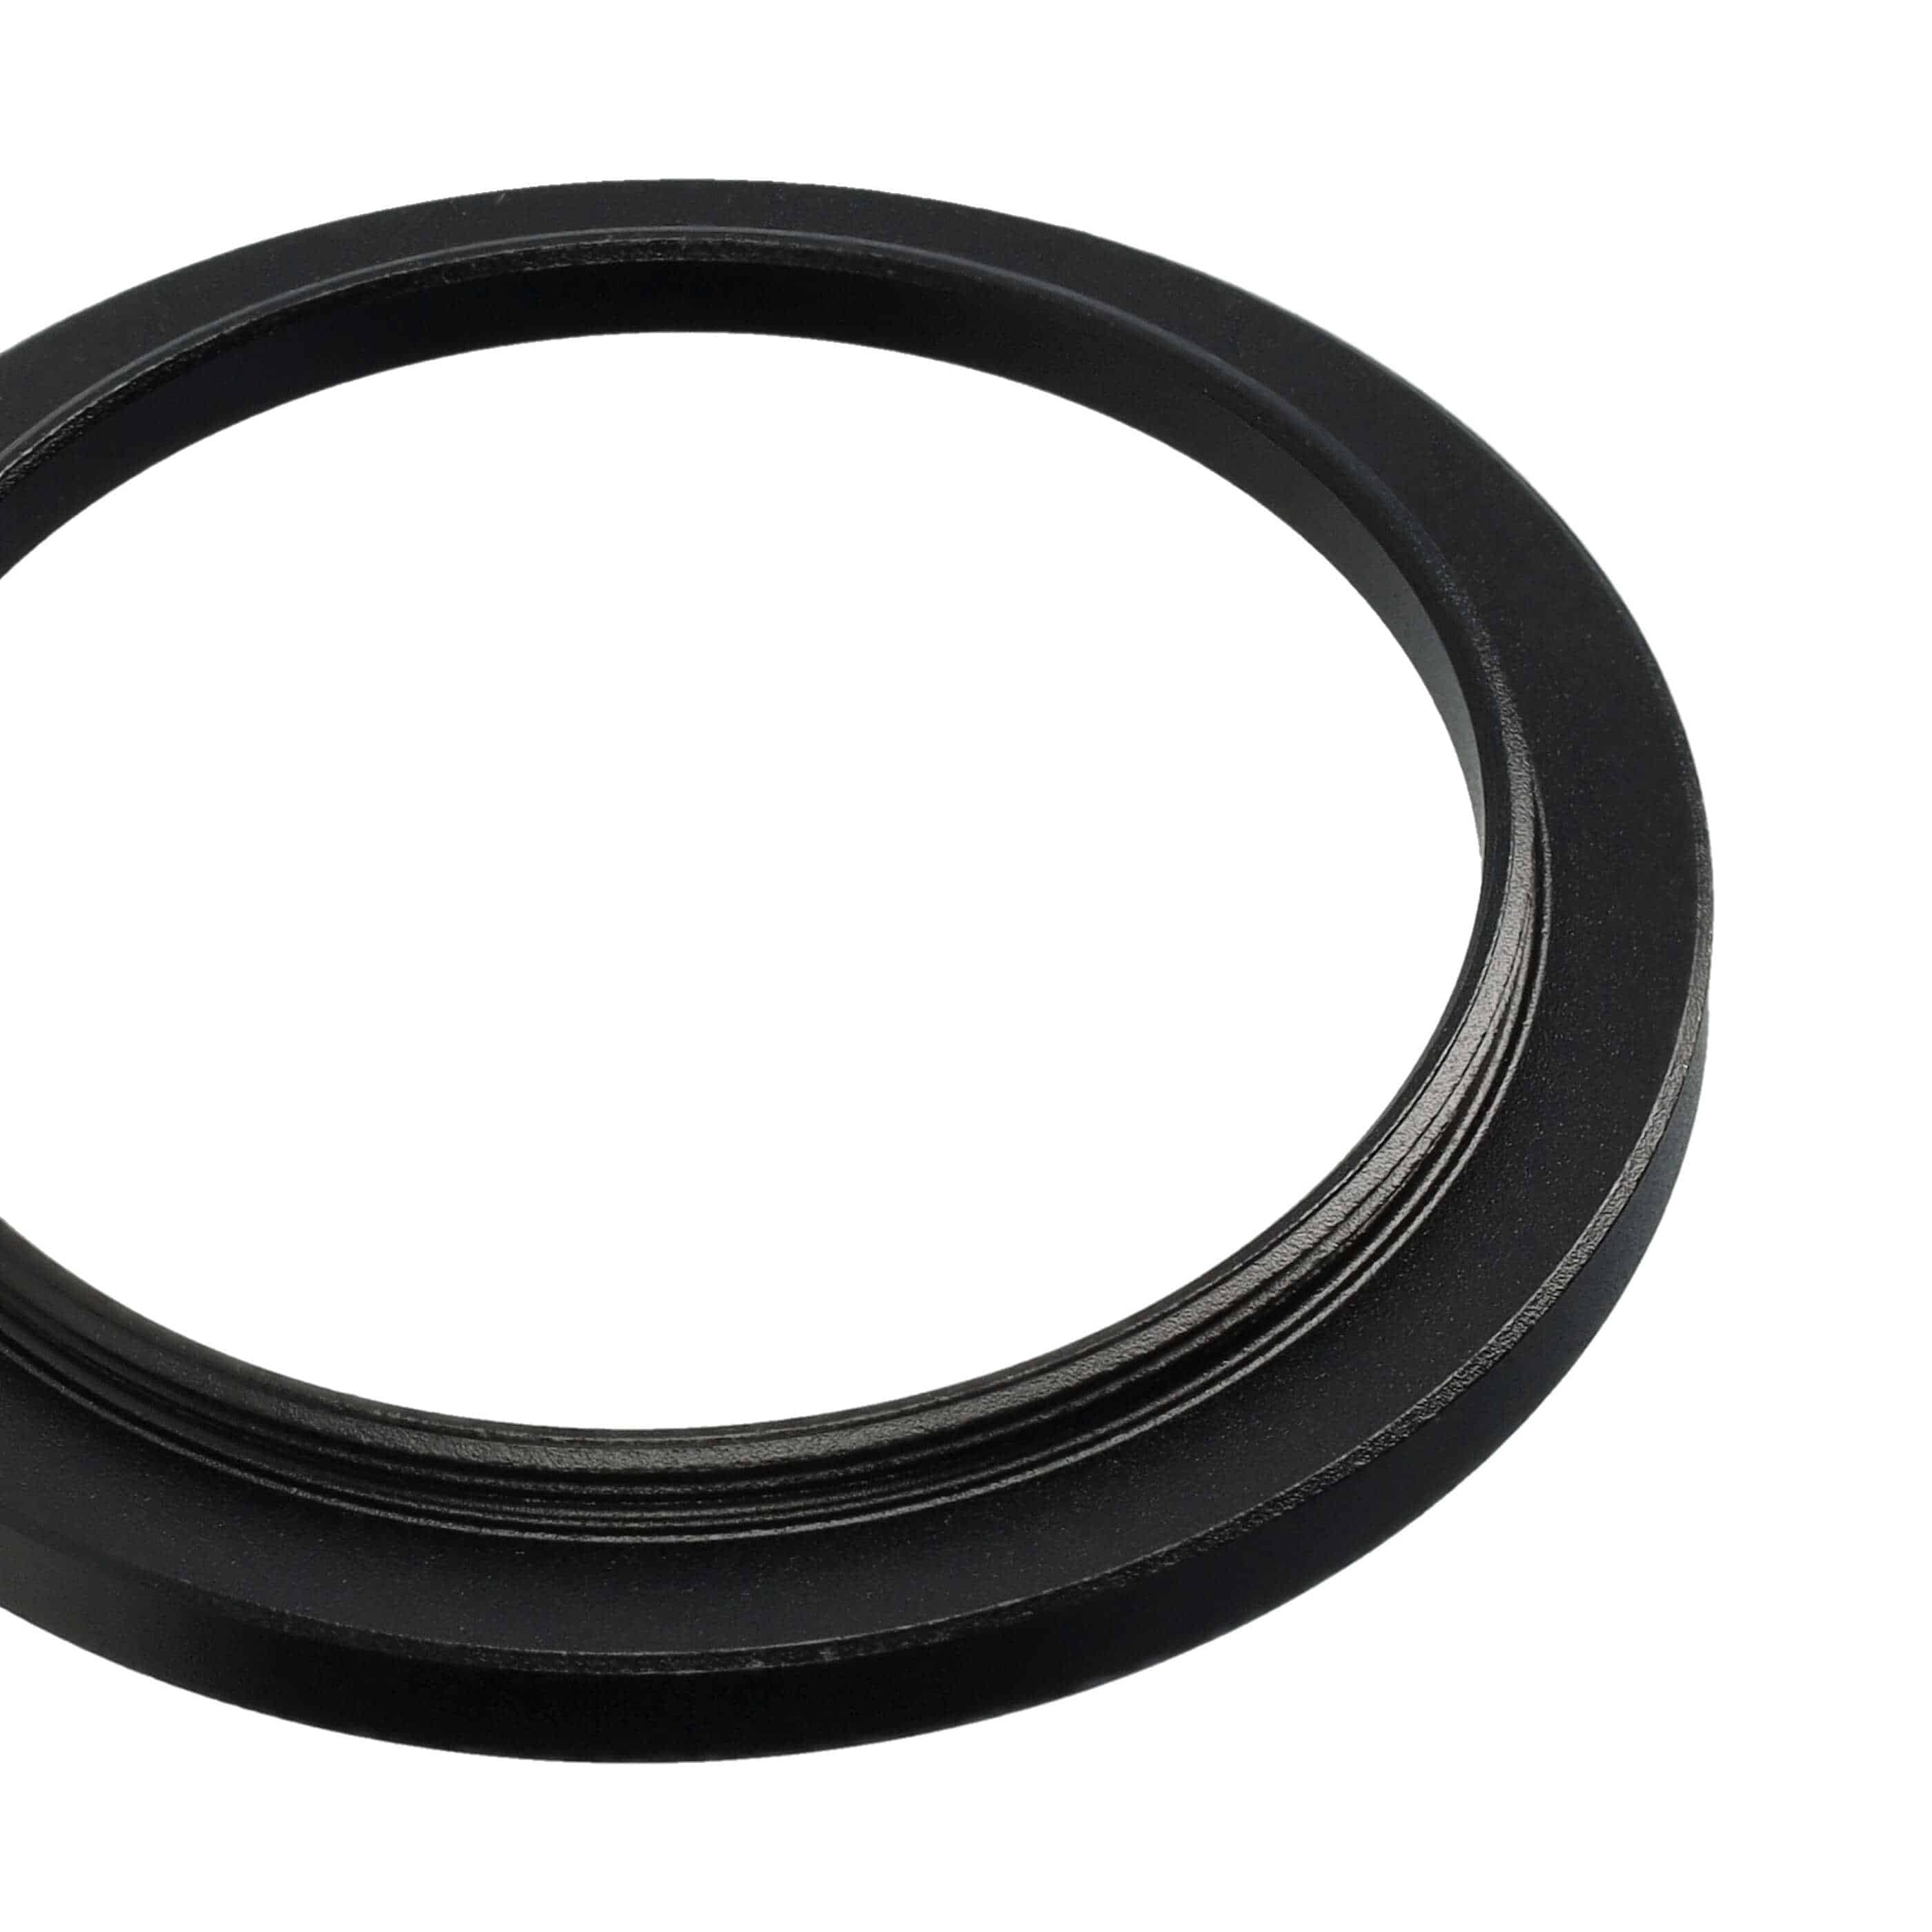 Step-Up Ring Adapter of 43 mm to 49 mmfor various Camera Lens - Filter Adapter